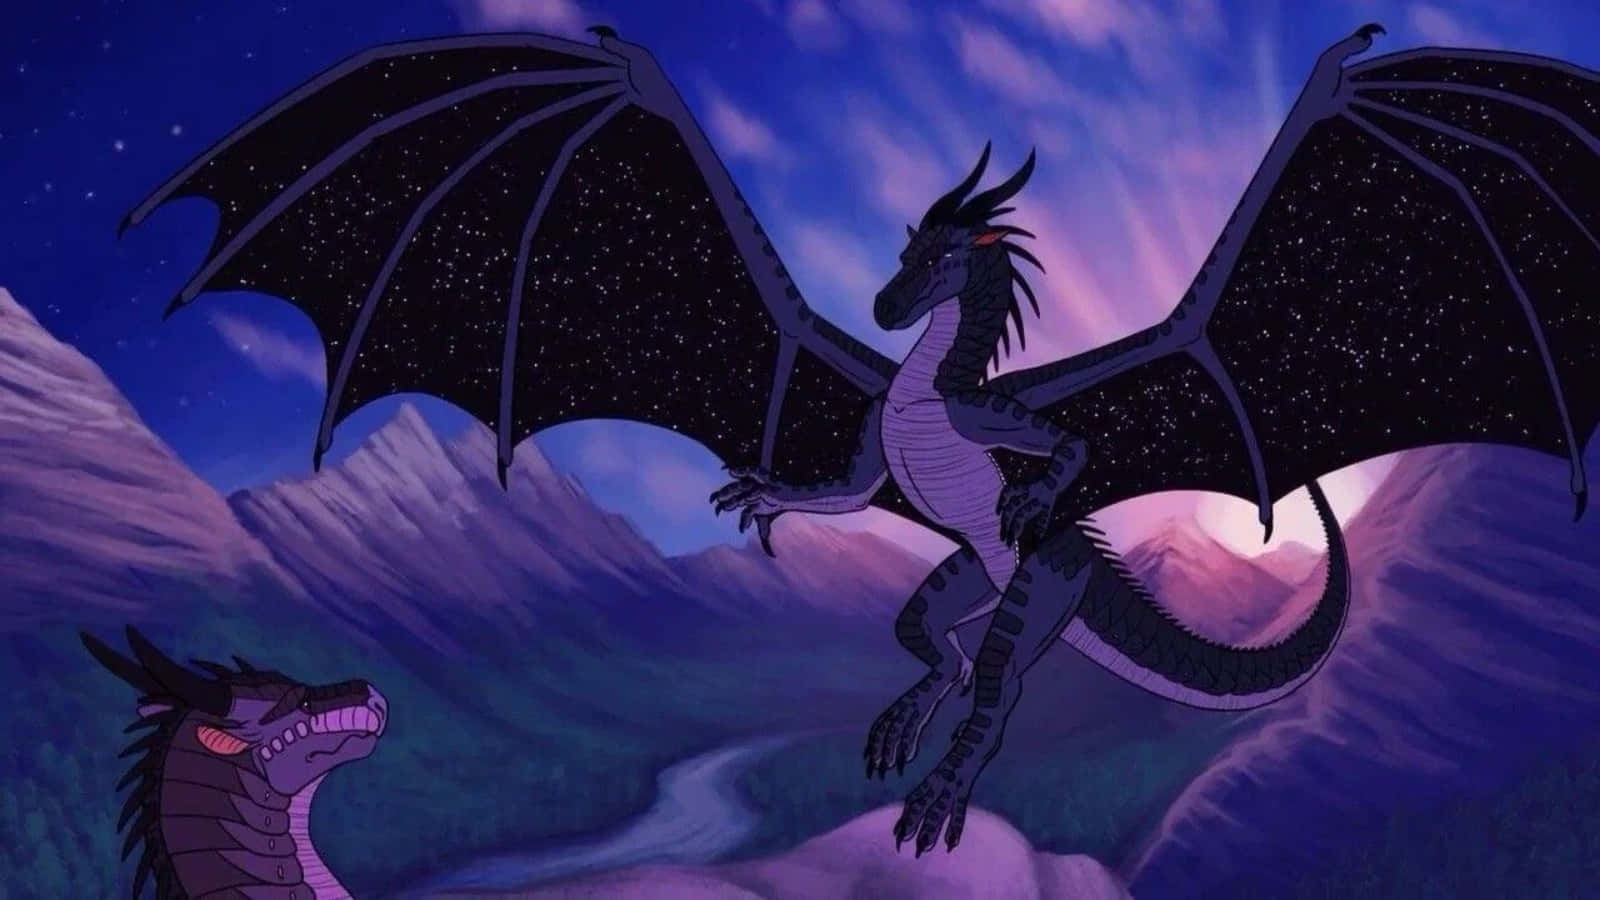 Undying strength and courage, as depicted by the image of the mythical dragon from Wings of Fire."